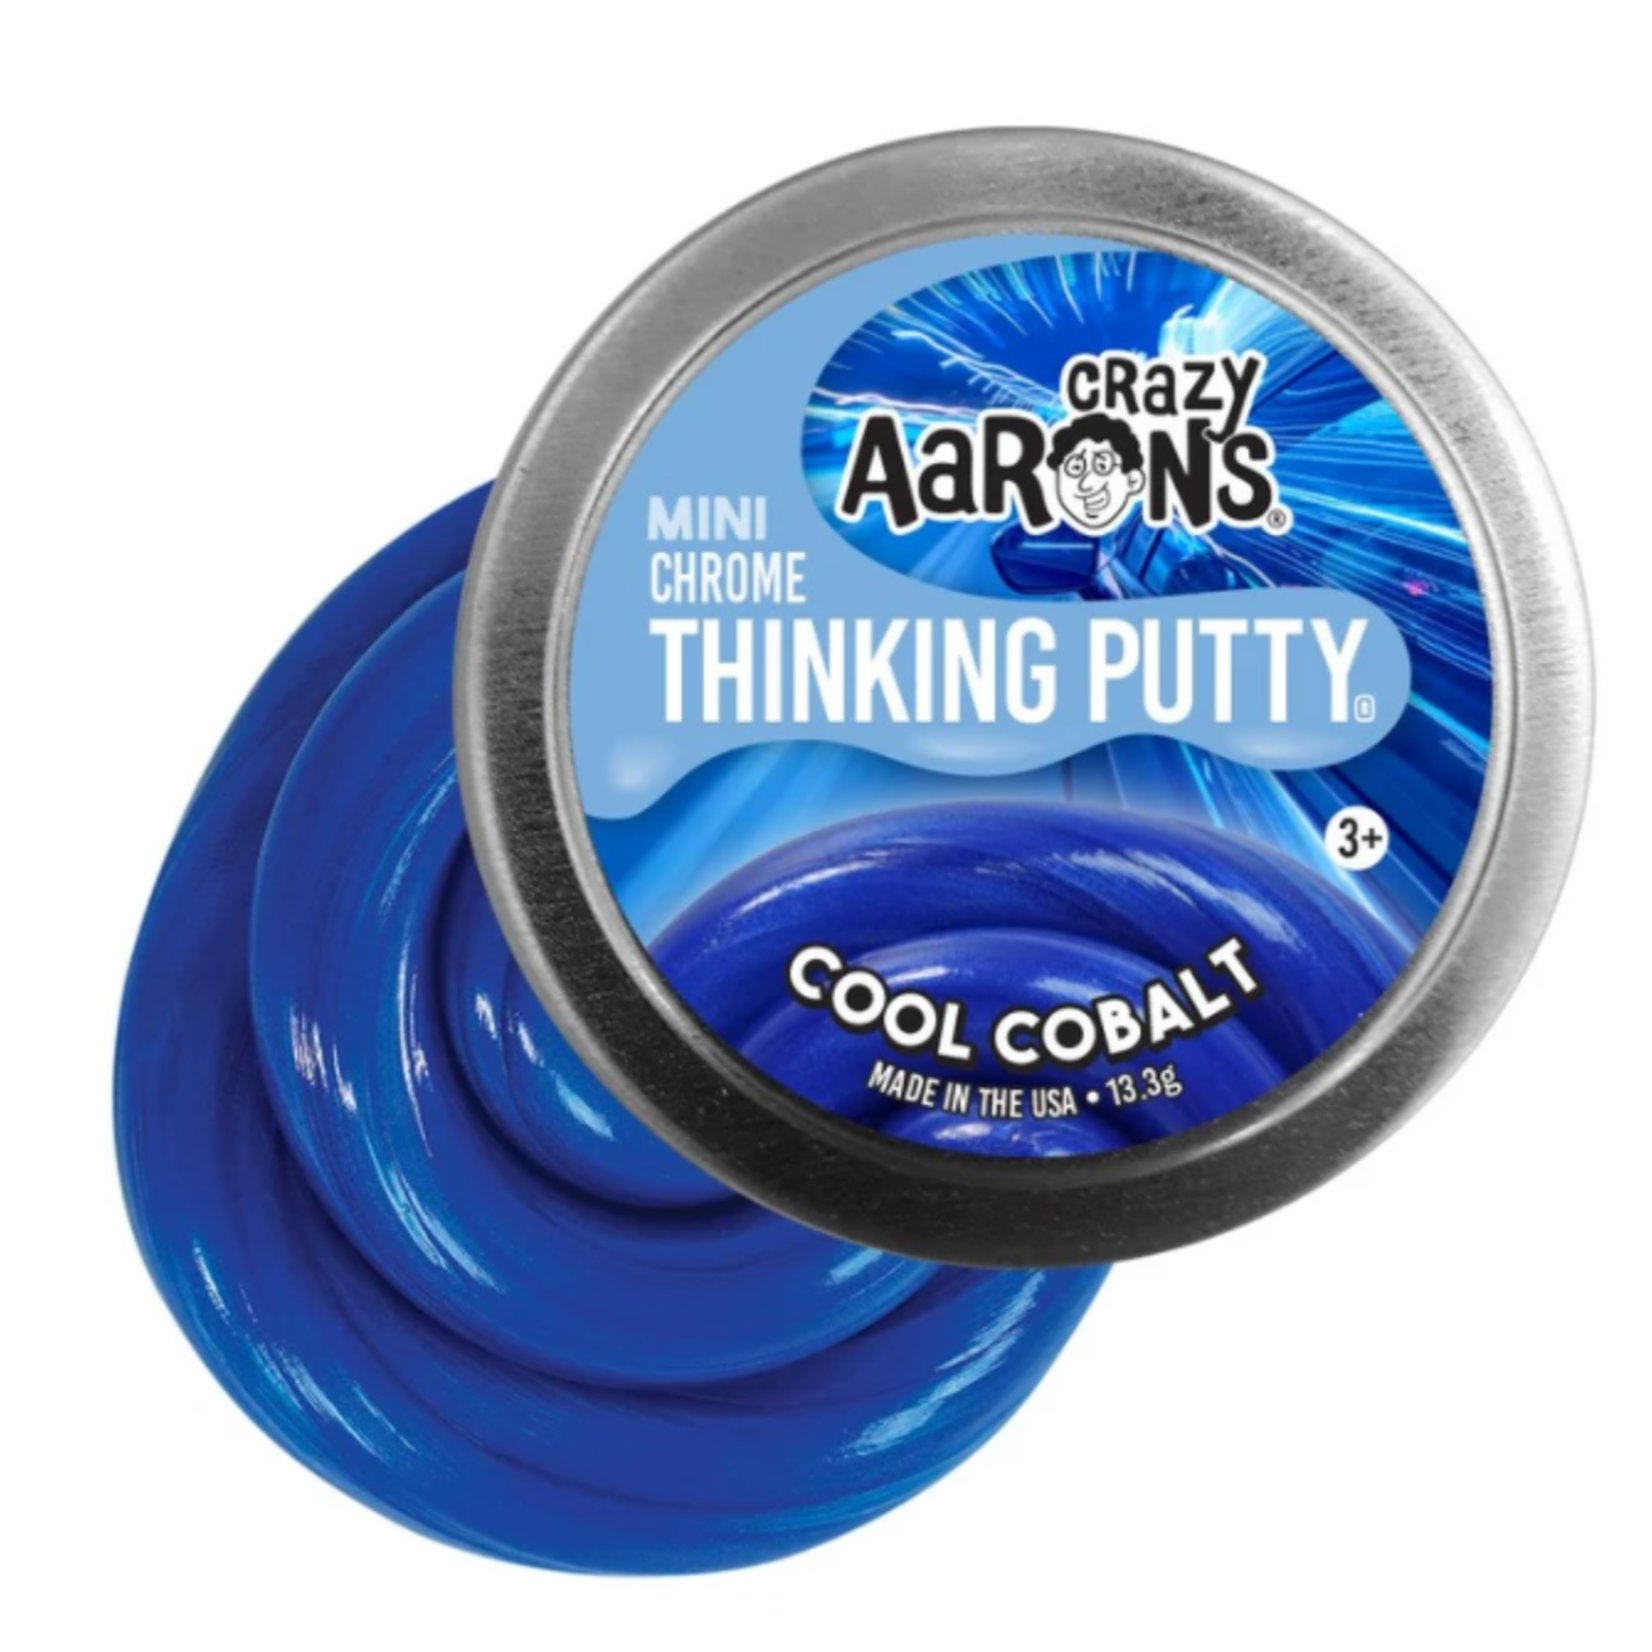 Crazy Aaron's Thinking Putty Cool Cobalt Thinking Putty